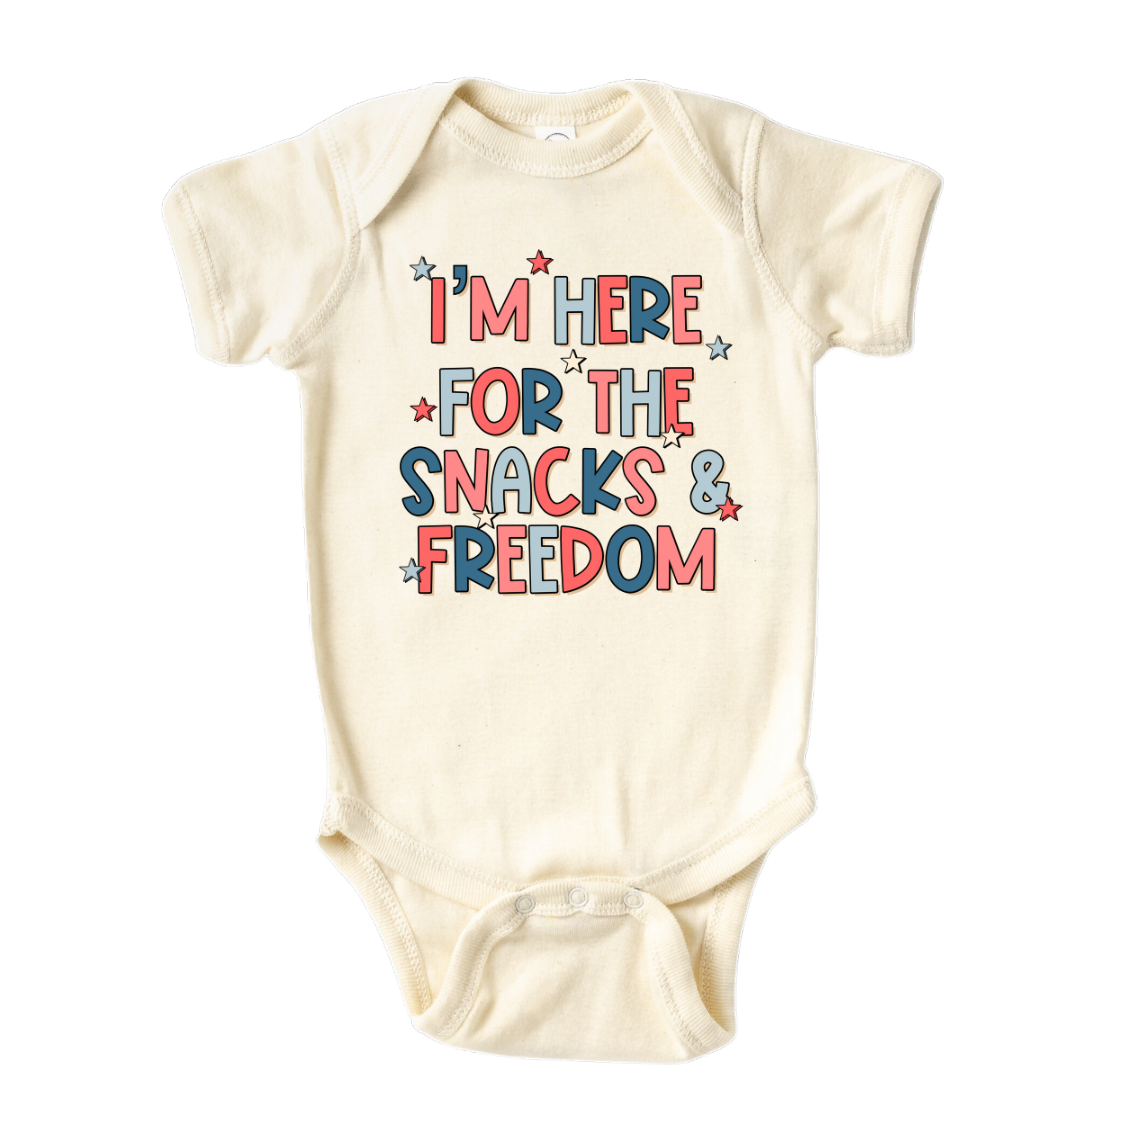 Baby Onesie® I'm Here For The Snacks & Freedom Cute Infant Clothing for Baby Shower Gift